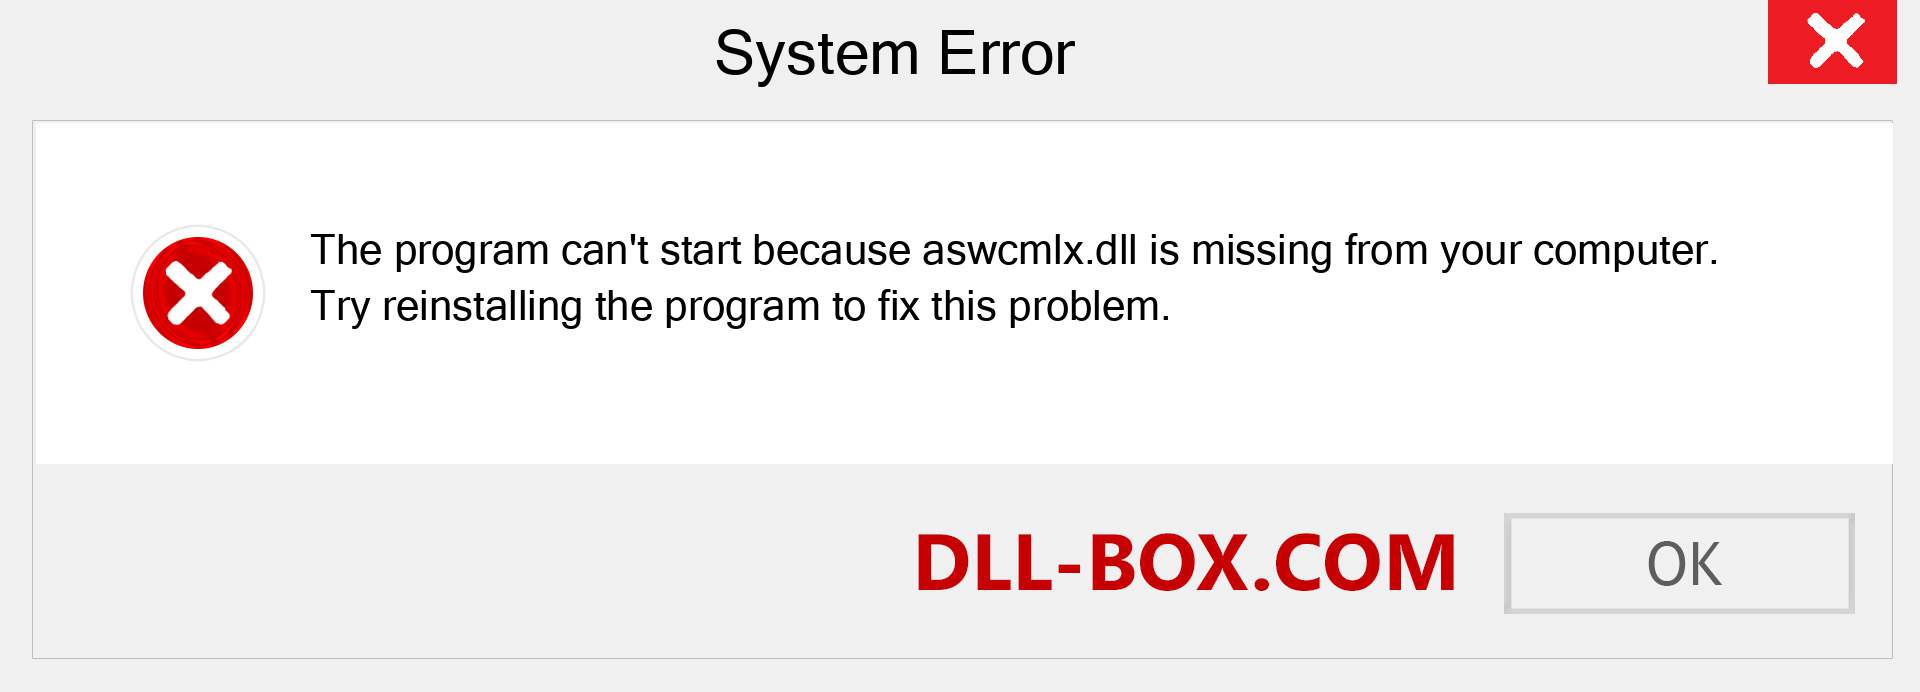  aswcmlx.dll file is missing?. Download for Windows 7, 8, 10 - Fix  aswcmlx dll Missing Error on Windows, photos, images